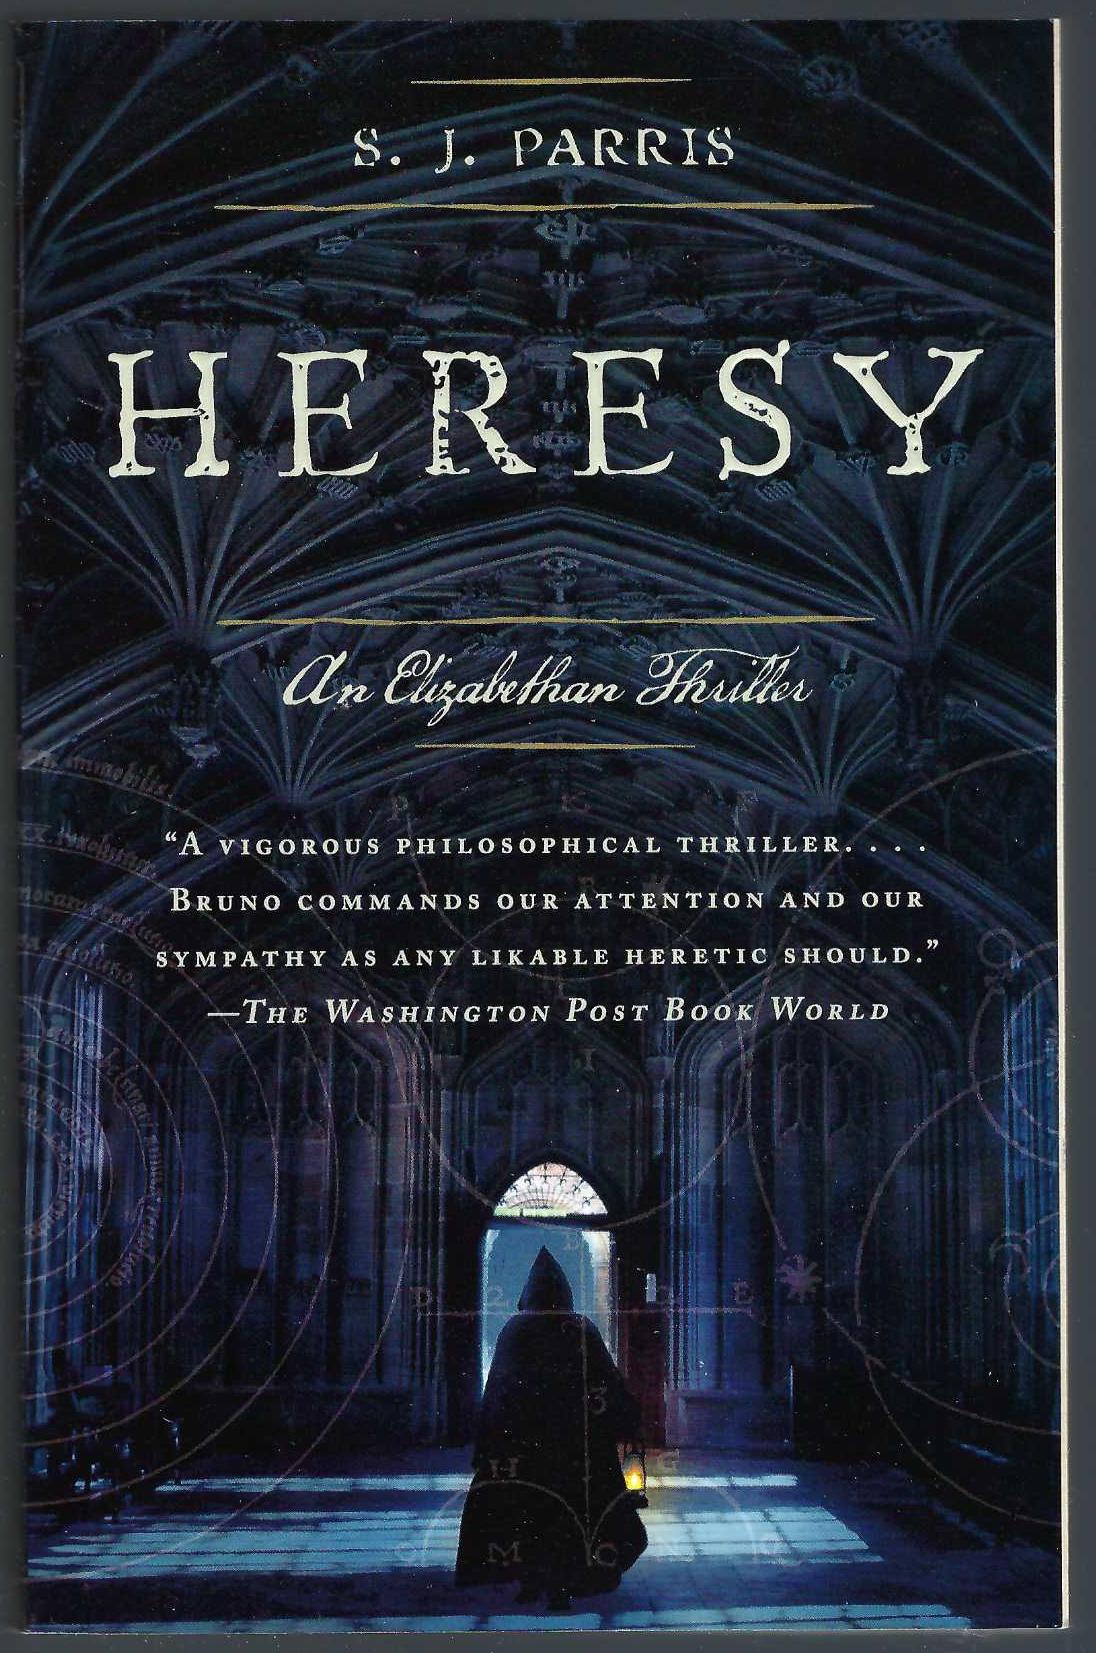 Heresy by S. J. Parris front cover